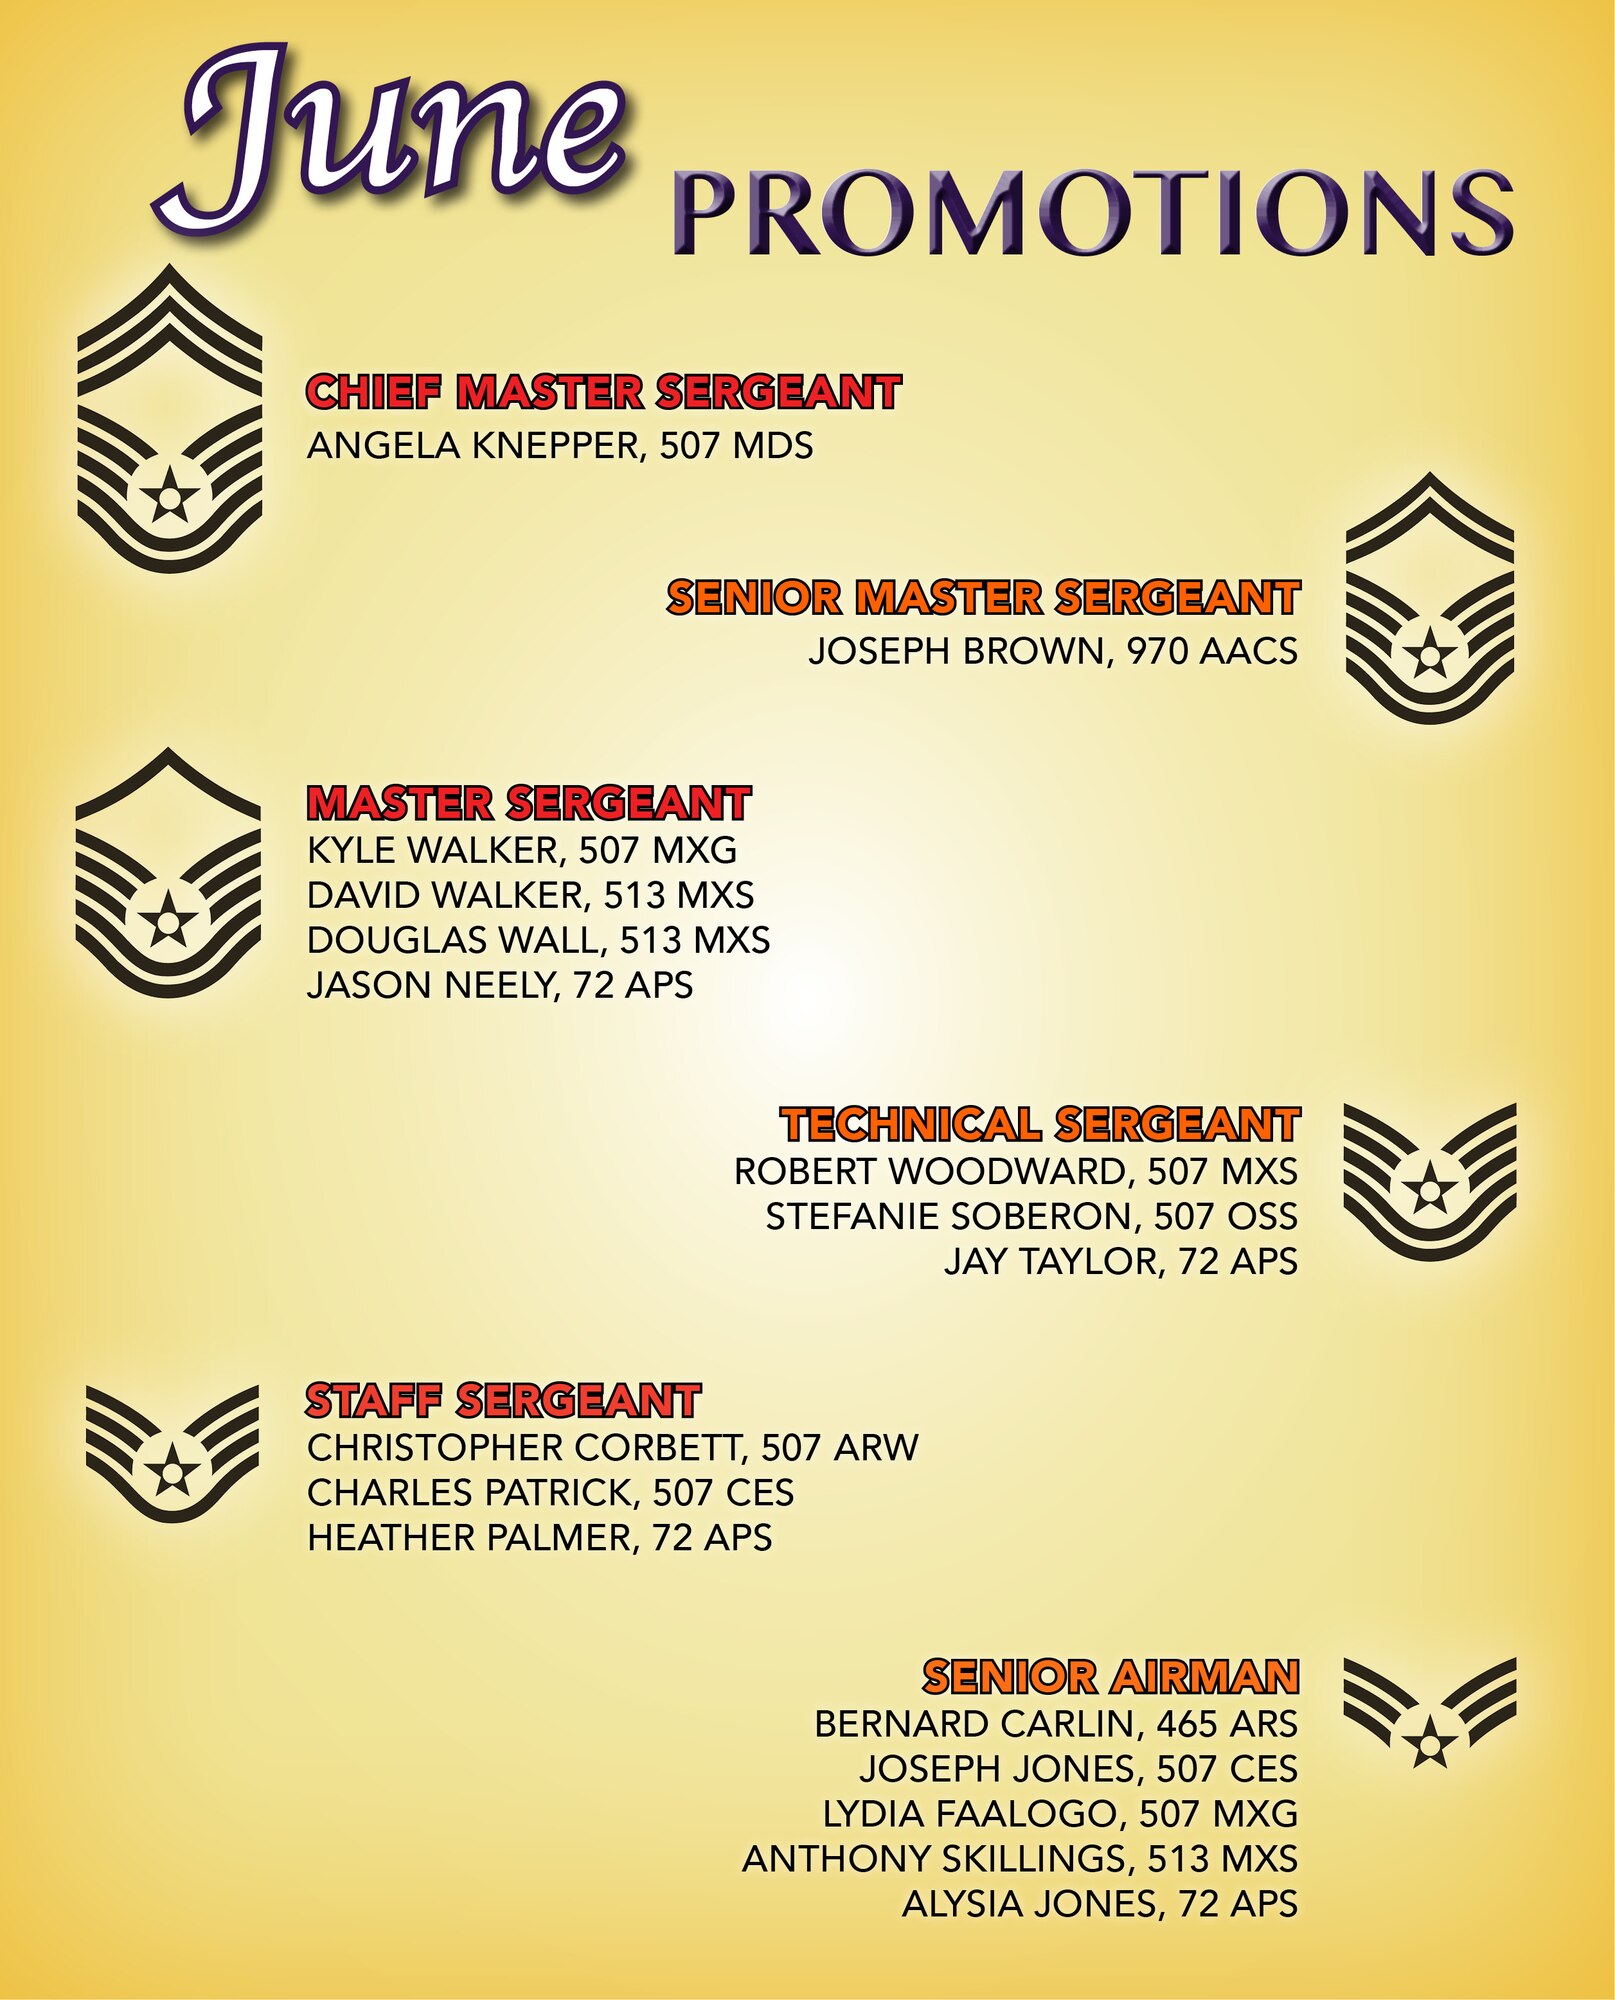 The 507th Air Refueling Wing enlisted promotion list for June 2019 at Tinker Air Force Base, Oklahoma. (U.S. Air Force image by Tech. Sgt. Samantha Mathison)